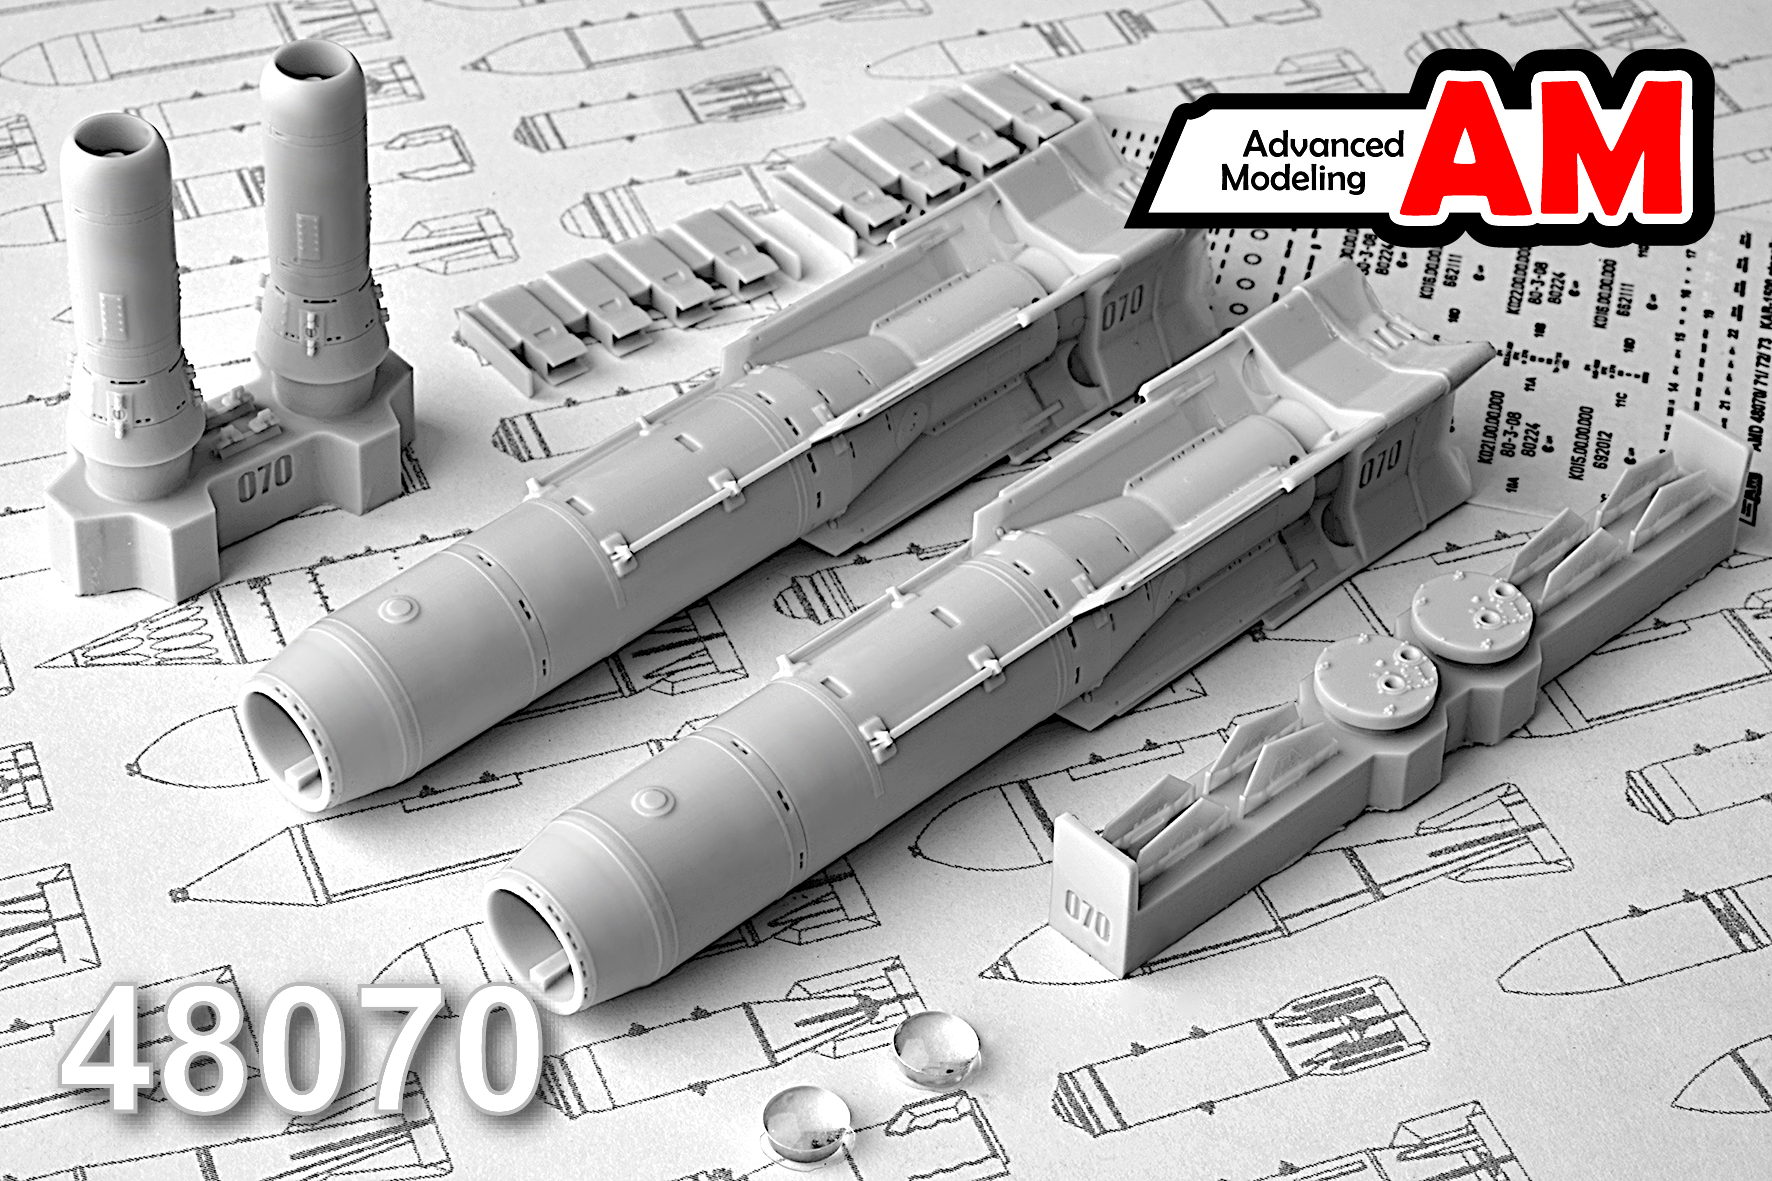 Additions (3D resin printing) 1/48 KAB-1500Kr Corrective Air Bomb (Advanced Modeling) 